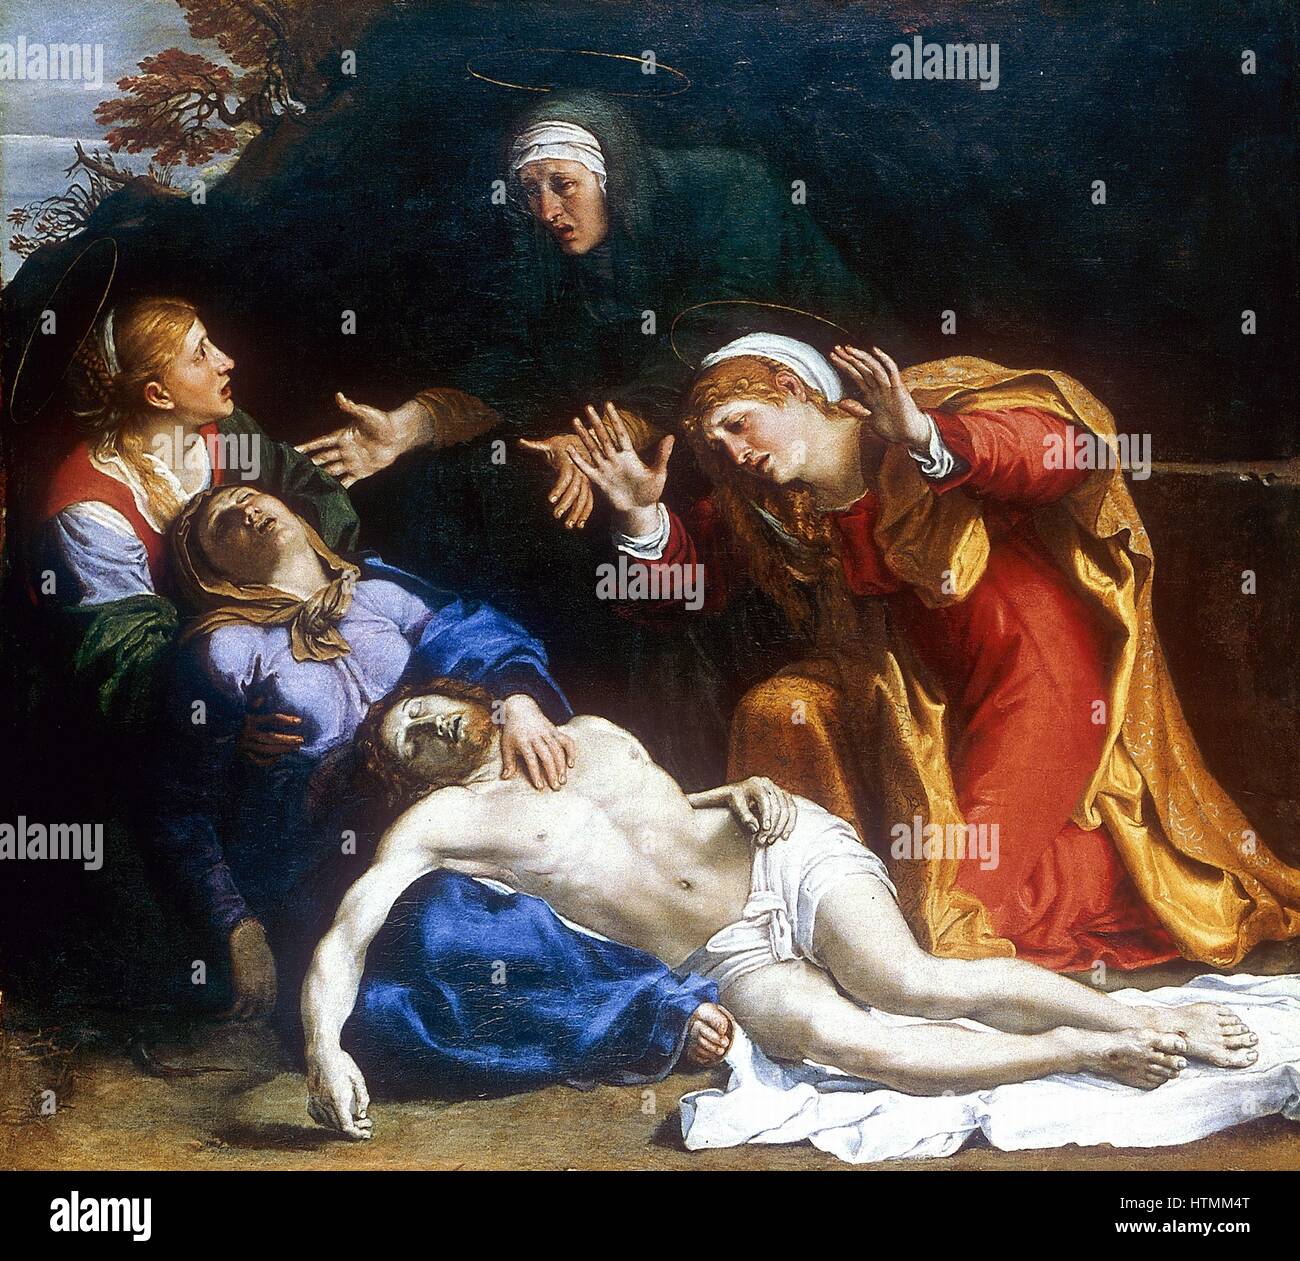 Annibale CARRACI (1560-1609)The Three Marys (The Dead Christ Mourned) 1604 Oil on canvas. National Gallery, London Stock Photo